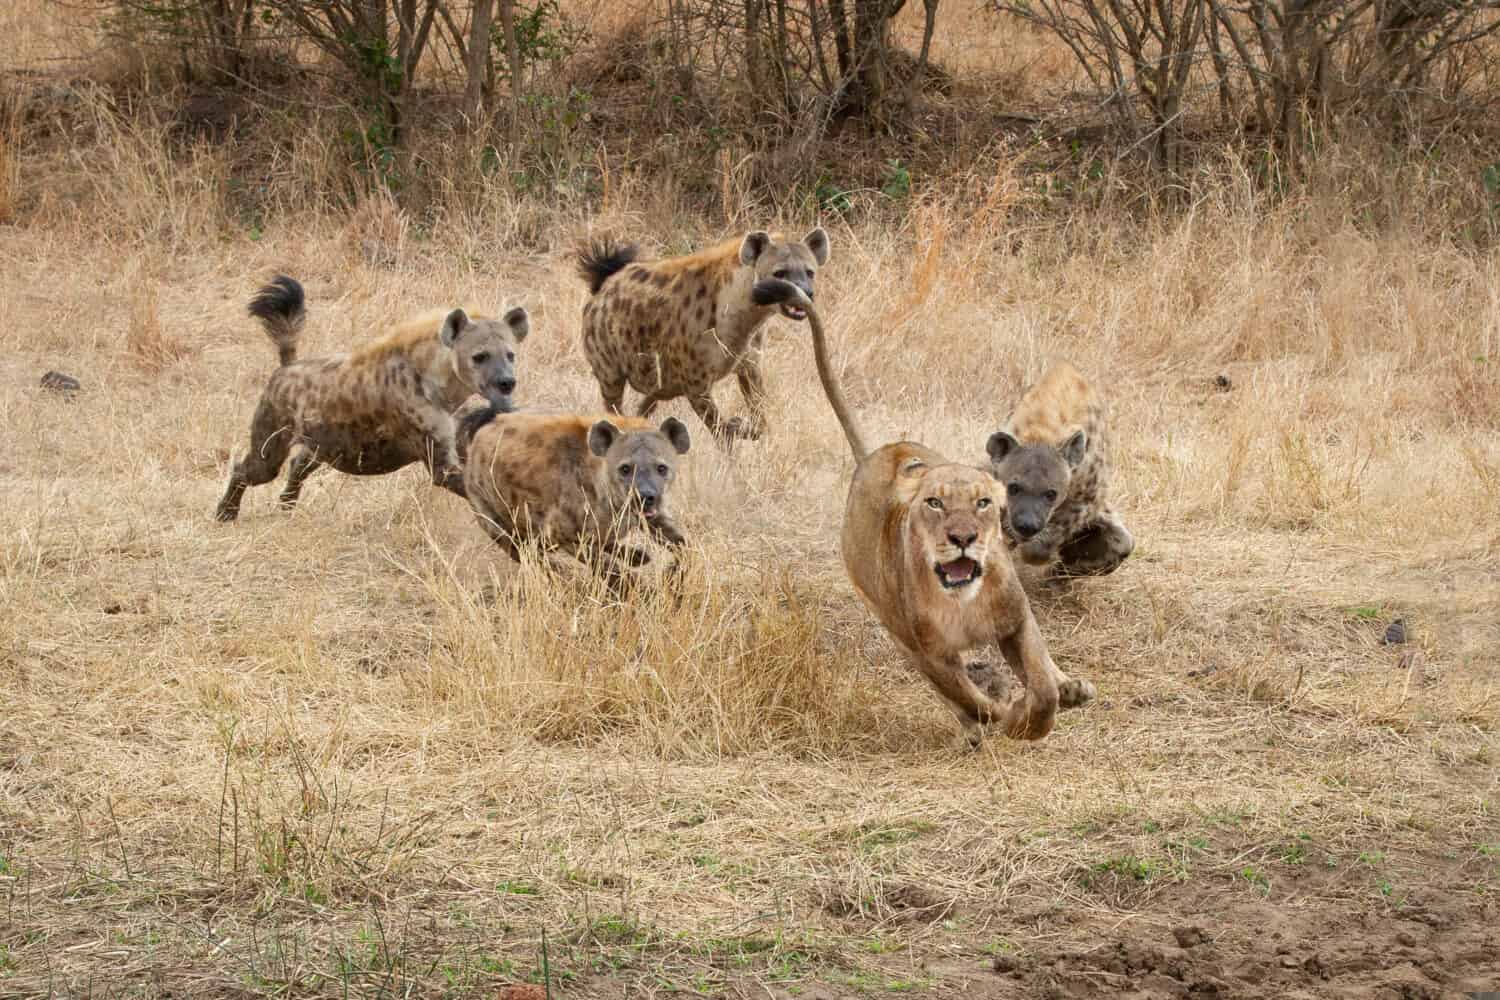 A lioness, Panthera leo, runs with ears back and mouth open from spotted hyenas, Crocuta crocuta